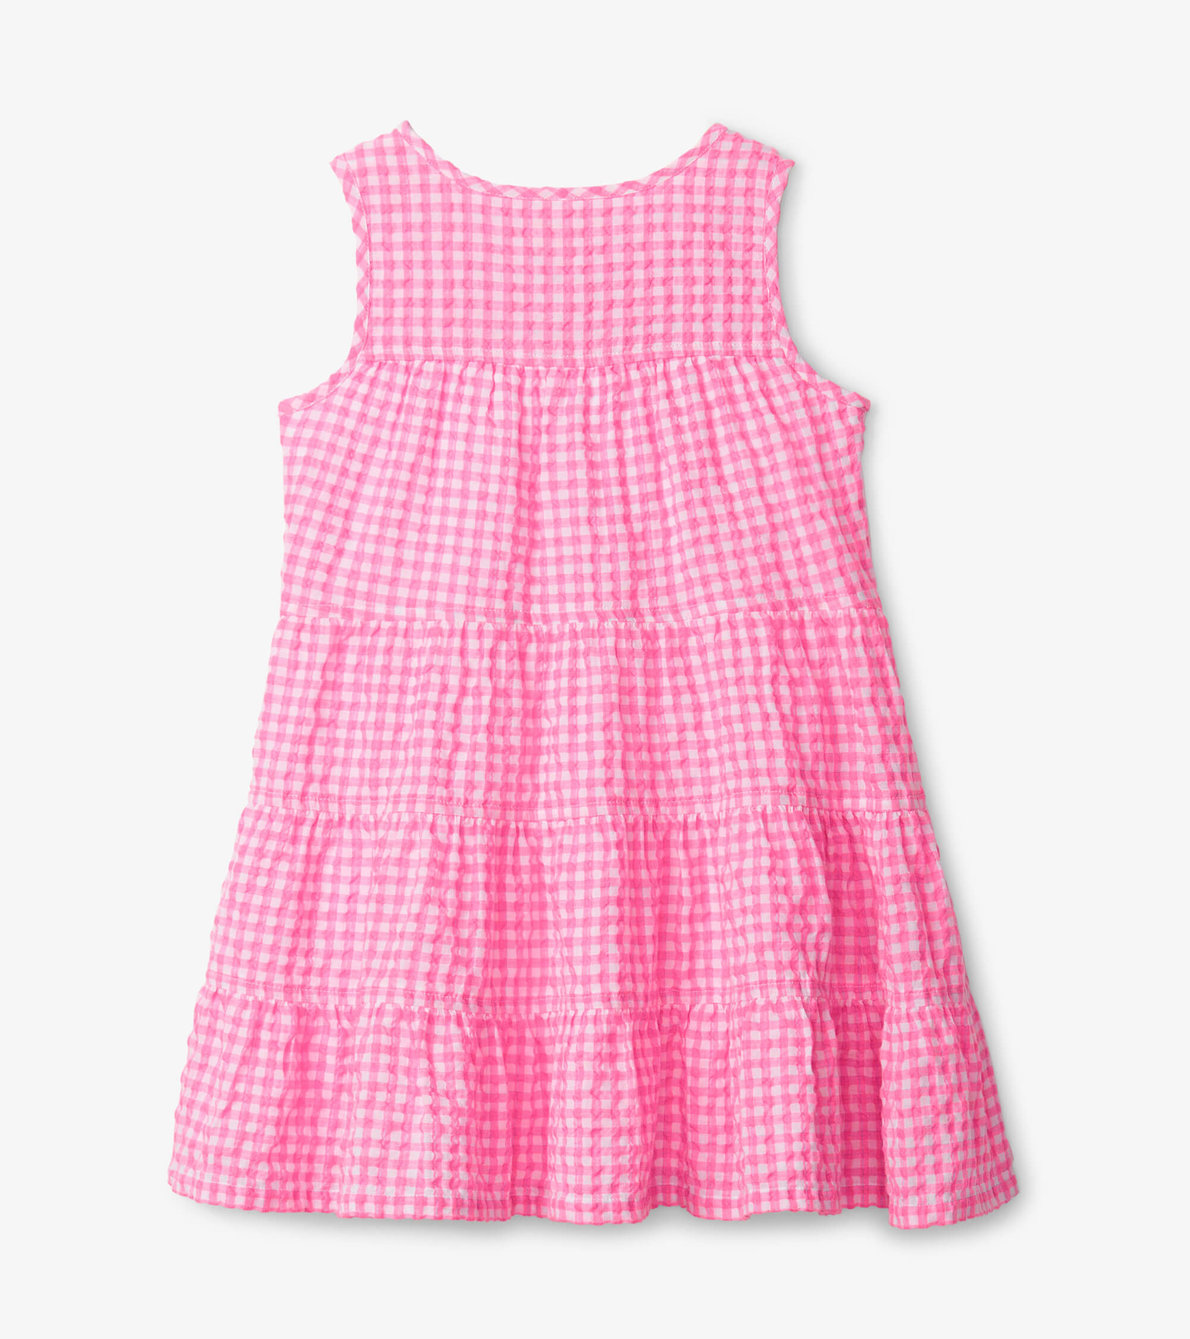 View larger image of Pink Gingham Tiered Dress